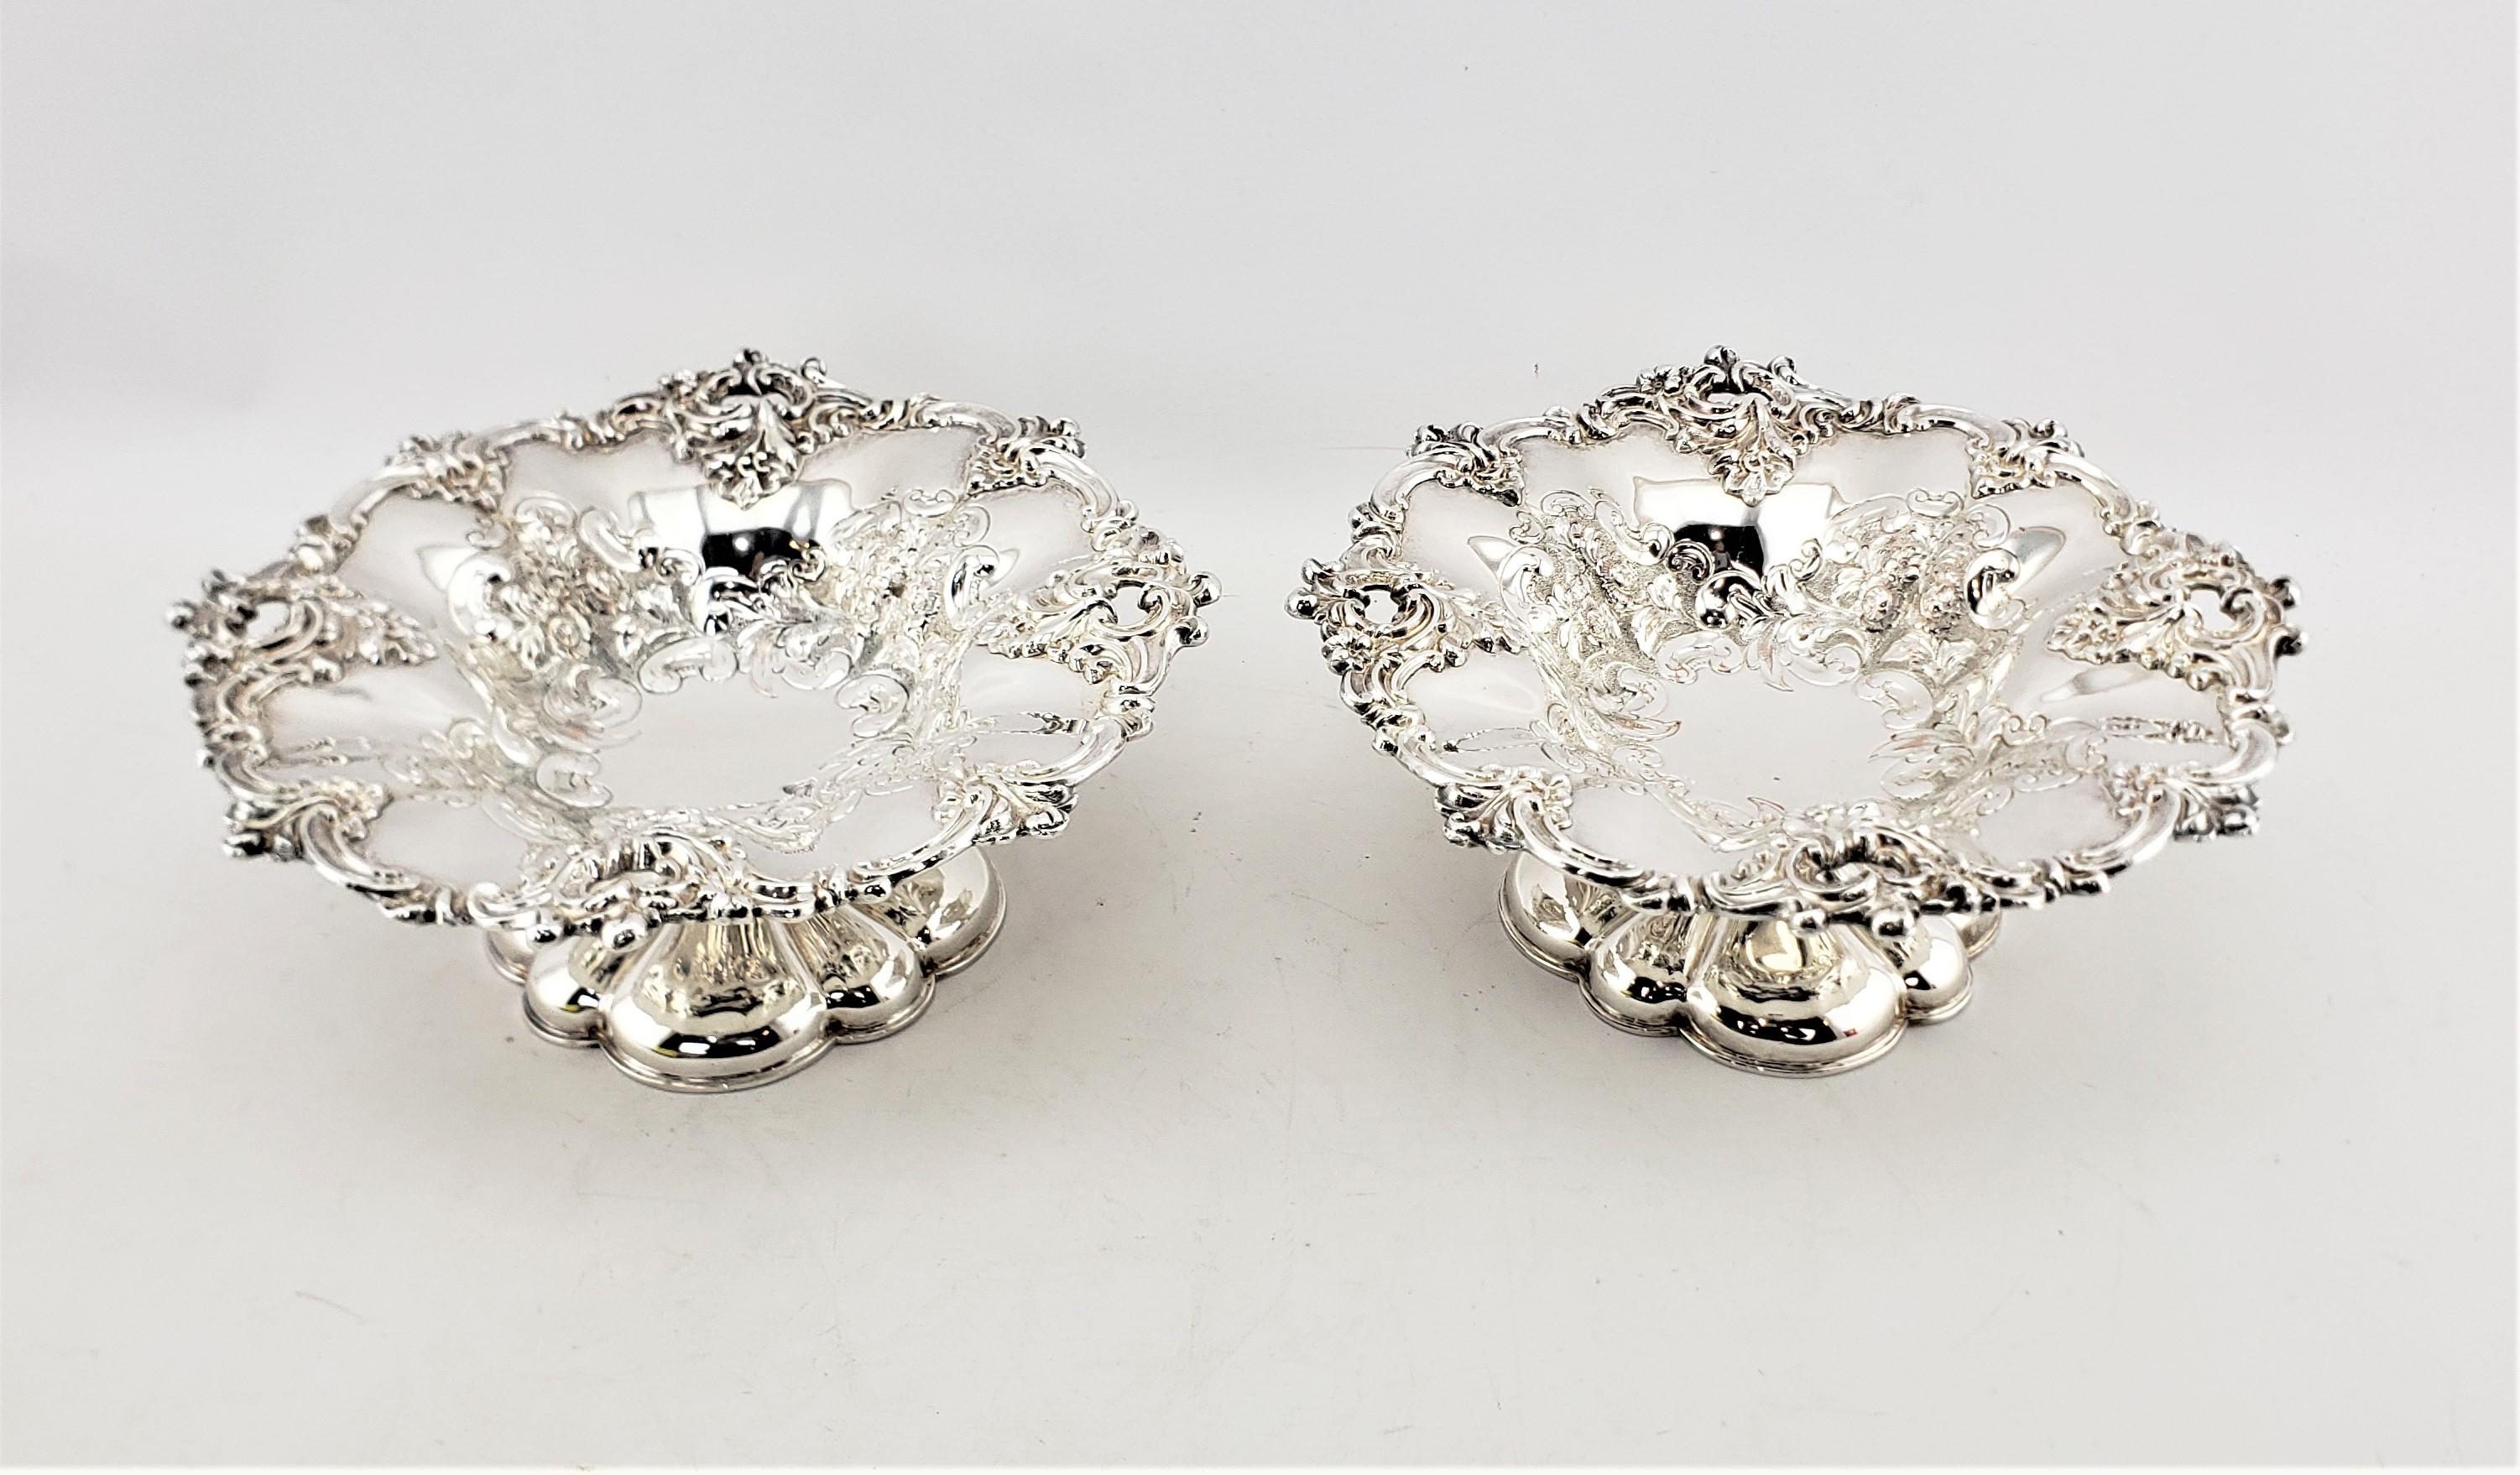 This pair of antique silver plated footed bowls or tazzas were made by the well known Barker-Ellis of England in approximately 1920 in a Victorian style. The bowls are done in silver plate over copper with scalloped edges with applied stylized